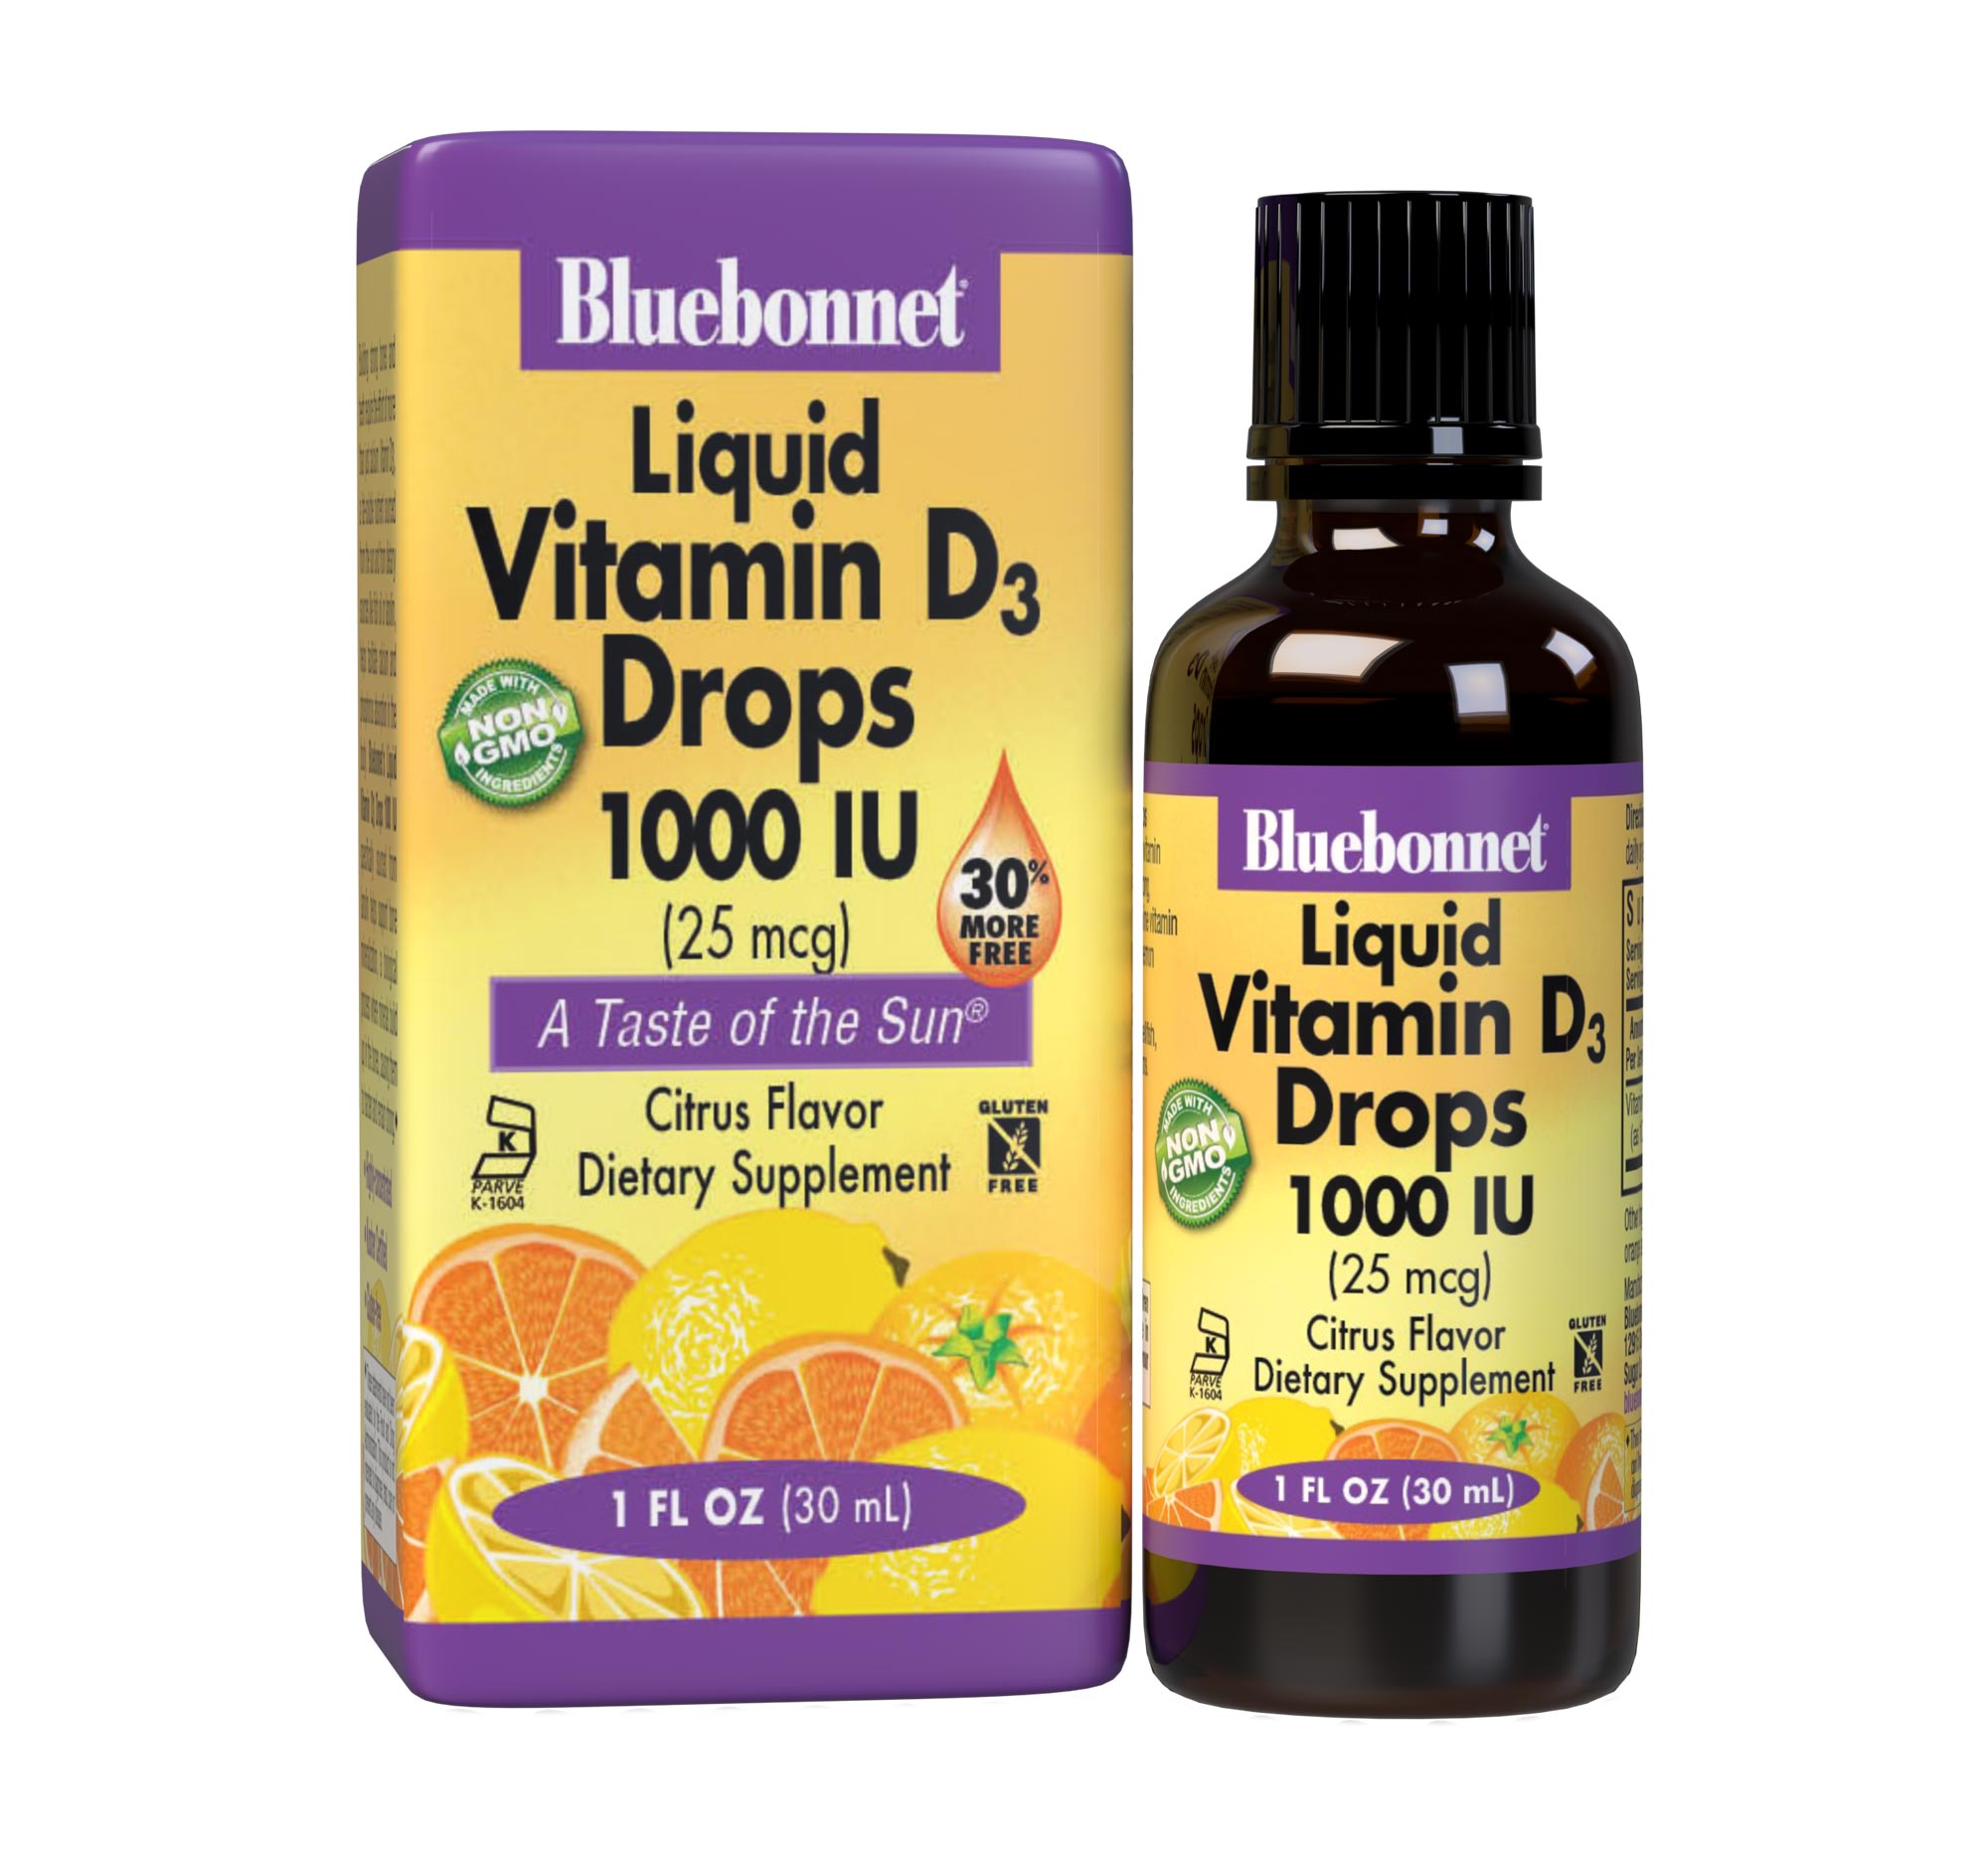 Bluebonnet’s Liquid Vitamin D3 Drops 1000 IU (25 mcg) are formulated with vitamin D3 (cholecalciferol) from lanolin for strong healthy bones. Each drop of this sunshine vitamin is flavored using a hint of orange and lemon essential oils. With box. #size_1 fl oz